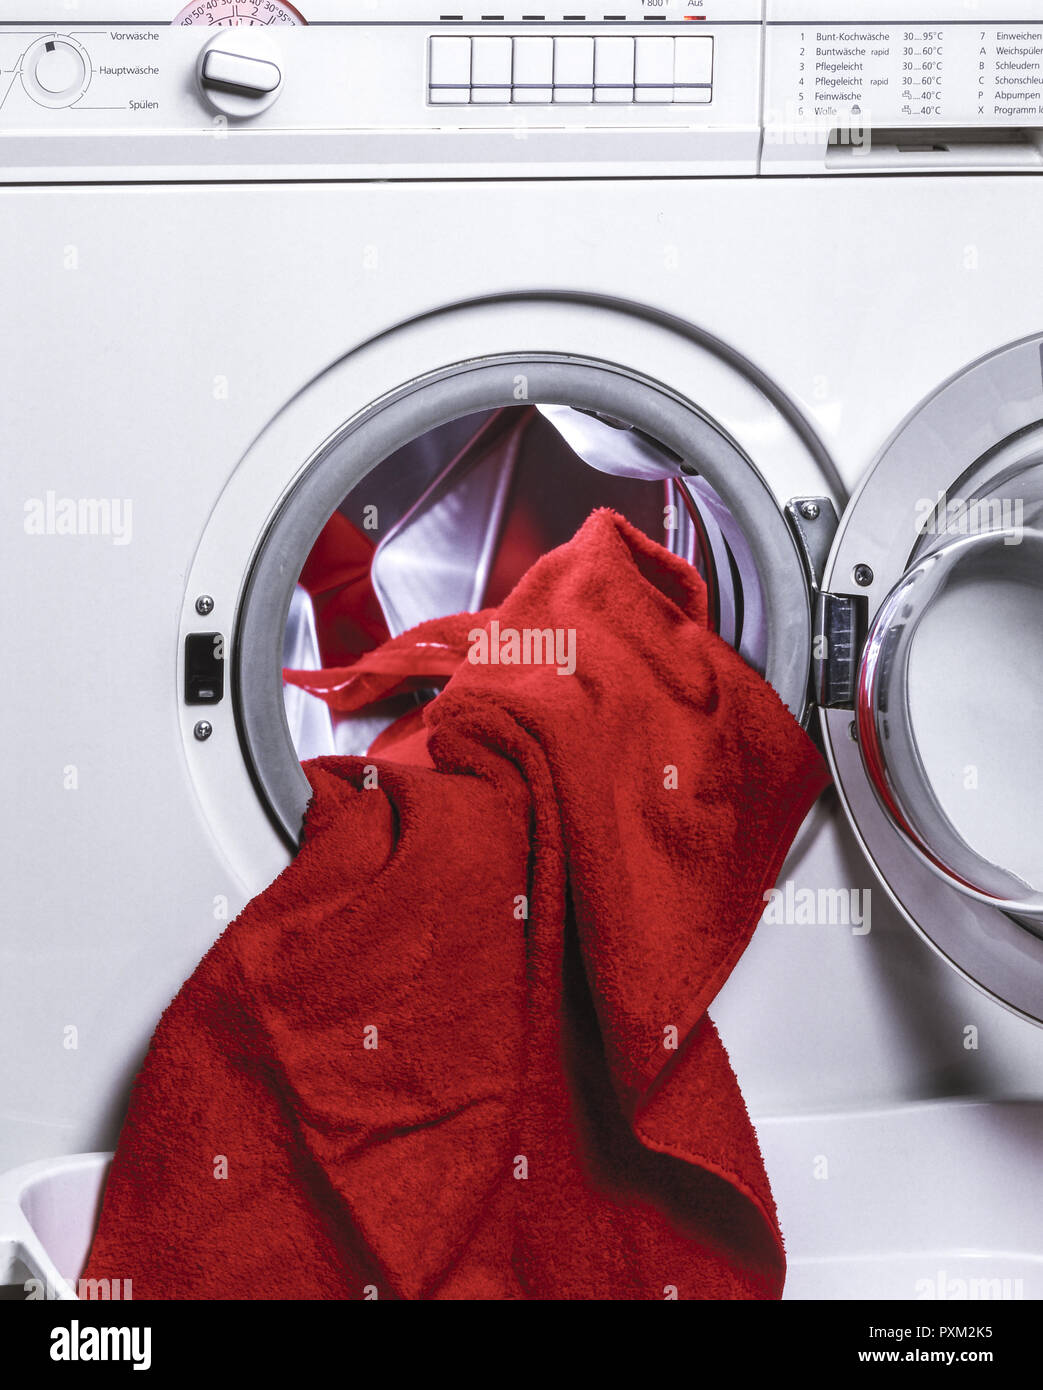 Waschmaschine, Front-Loading Washer, Home Appliance, Home Appliances, Washing Machine, Washer, Wash, Wash Tub, Household, Laundry, Basket, Towel, Red Stock Photo